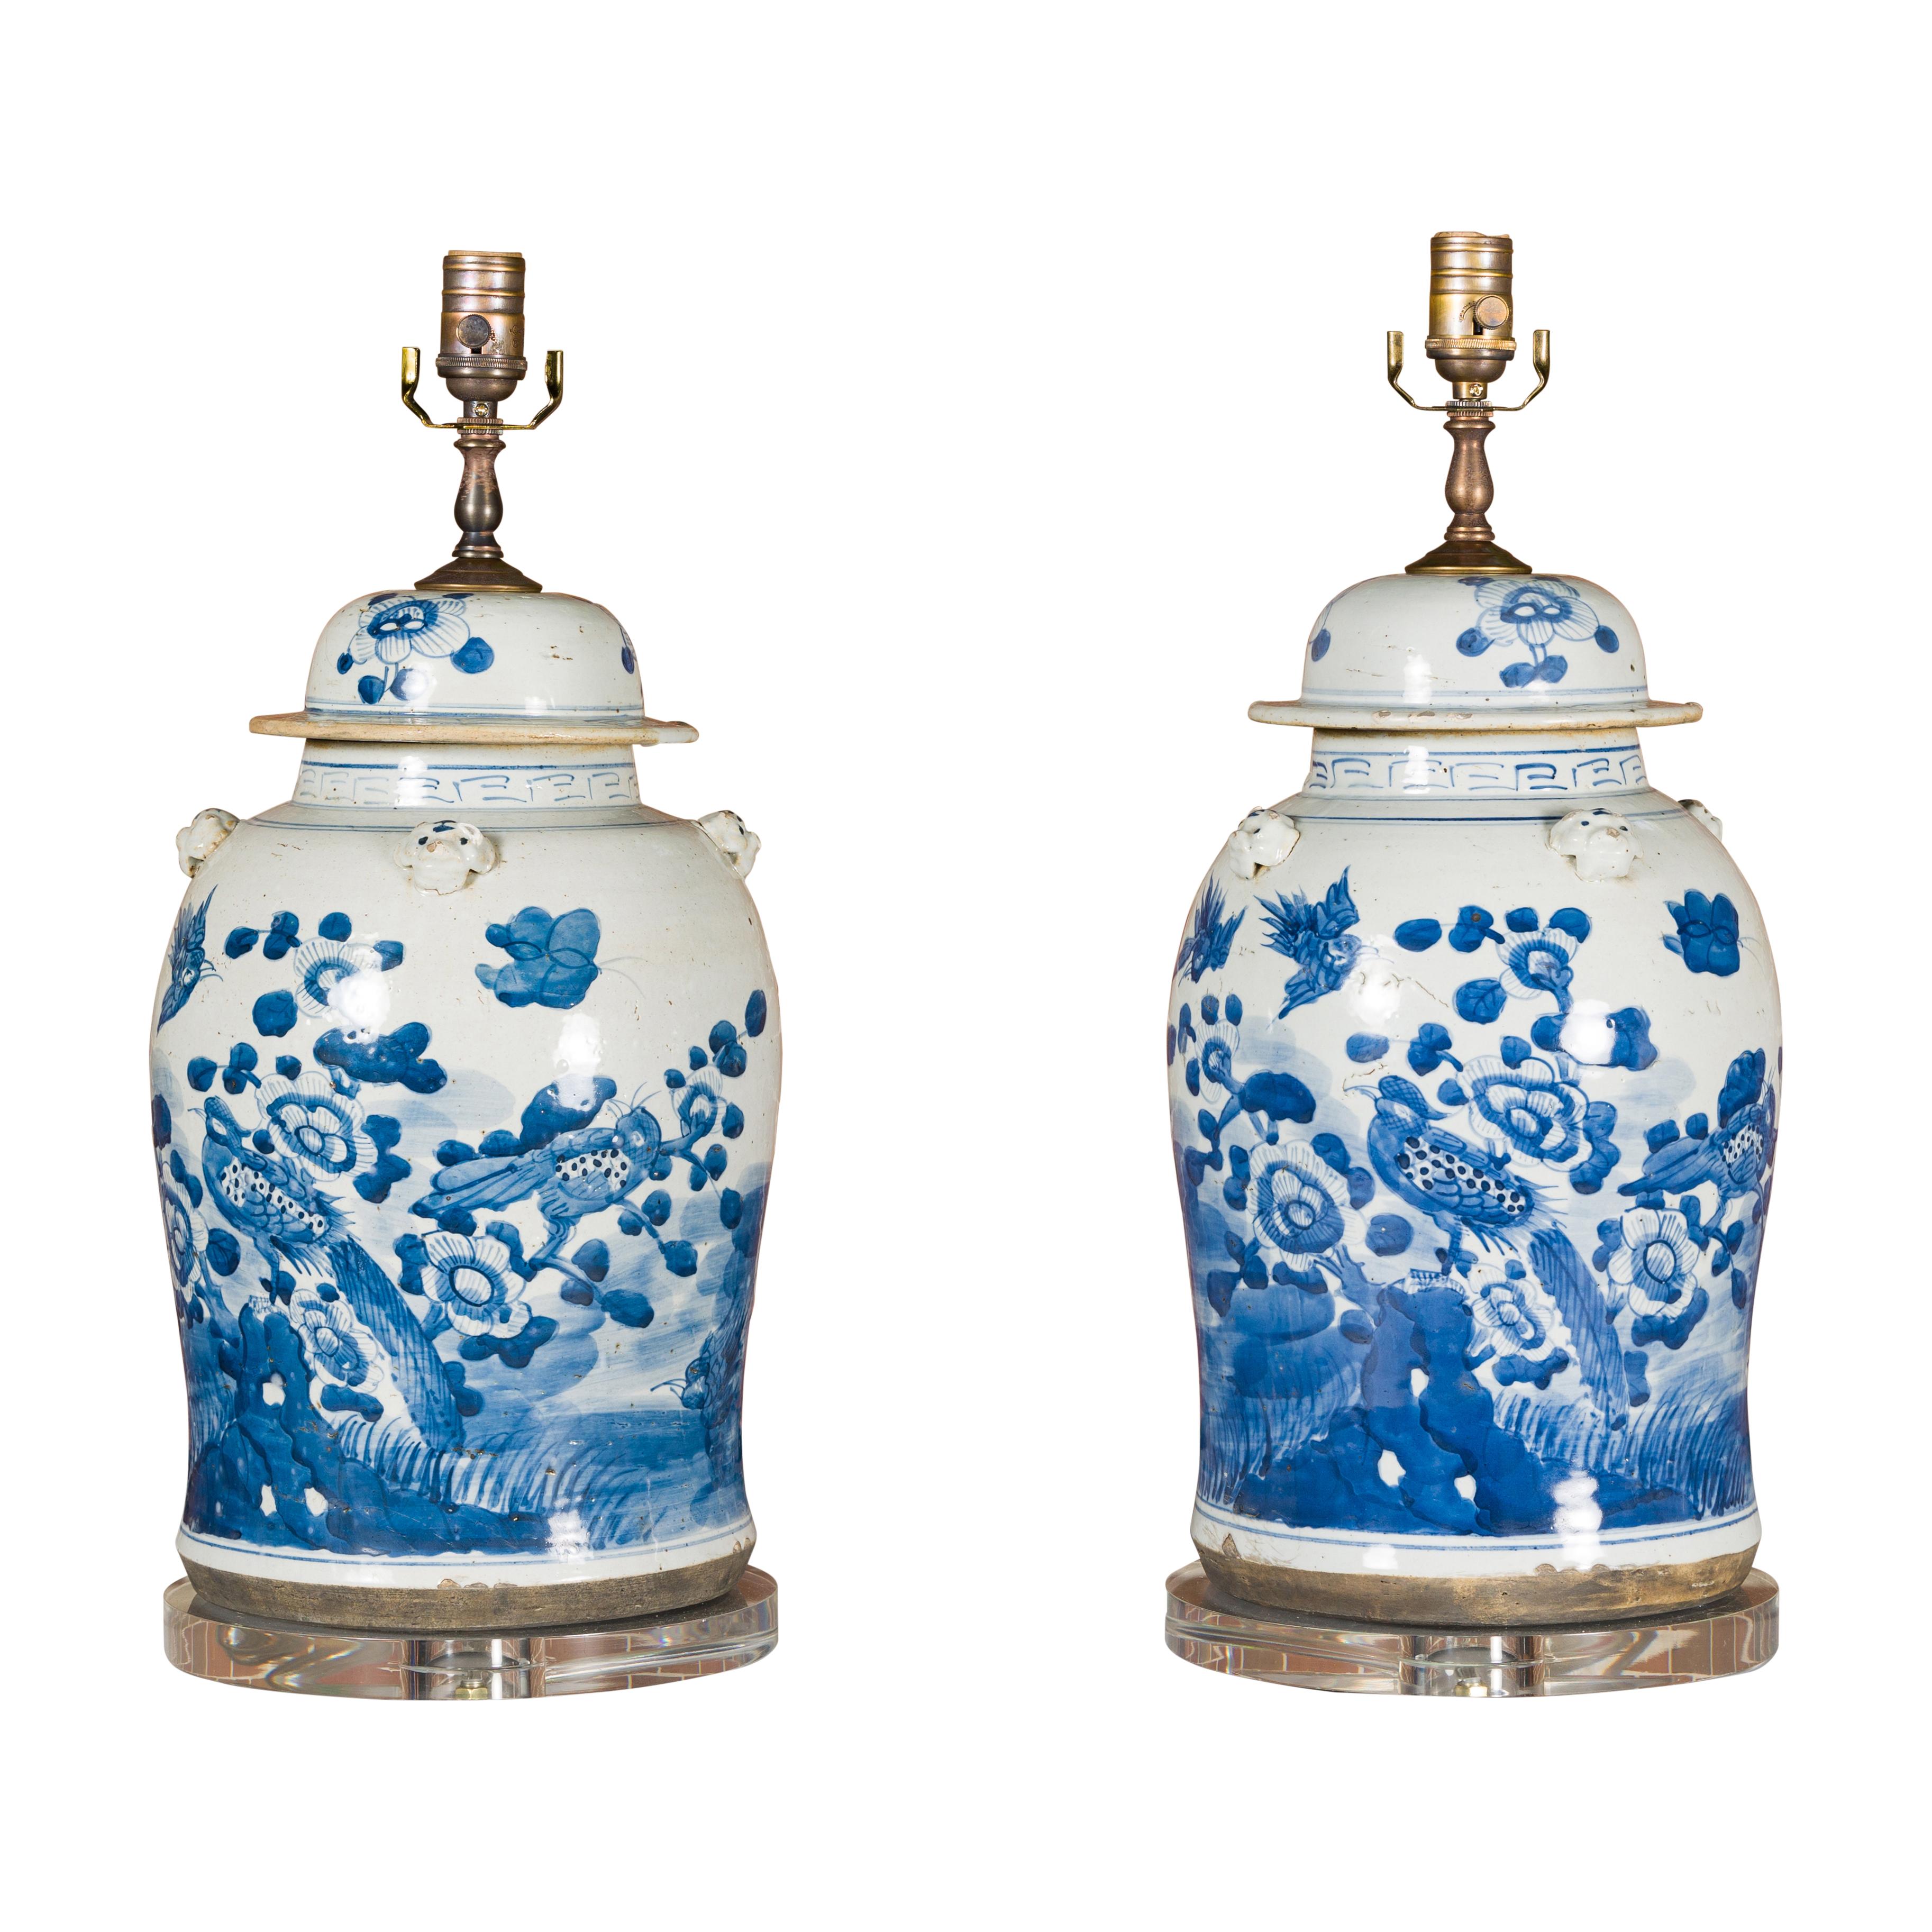 Pair of Asian Blue and White Porcelain Jars Made into Wired Table Lamps 10